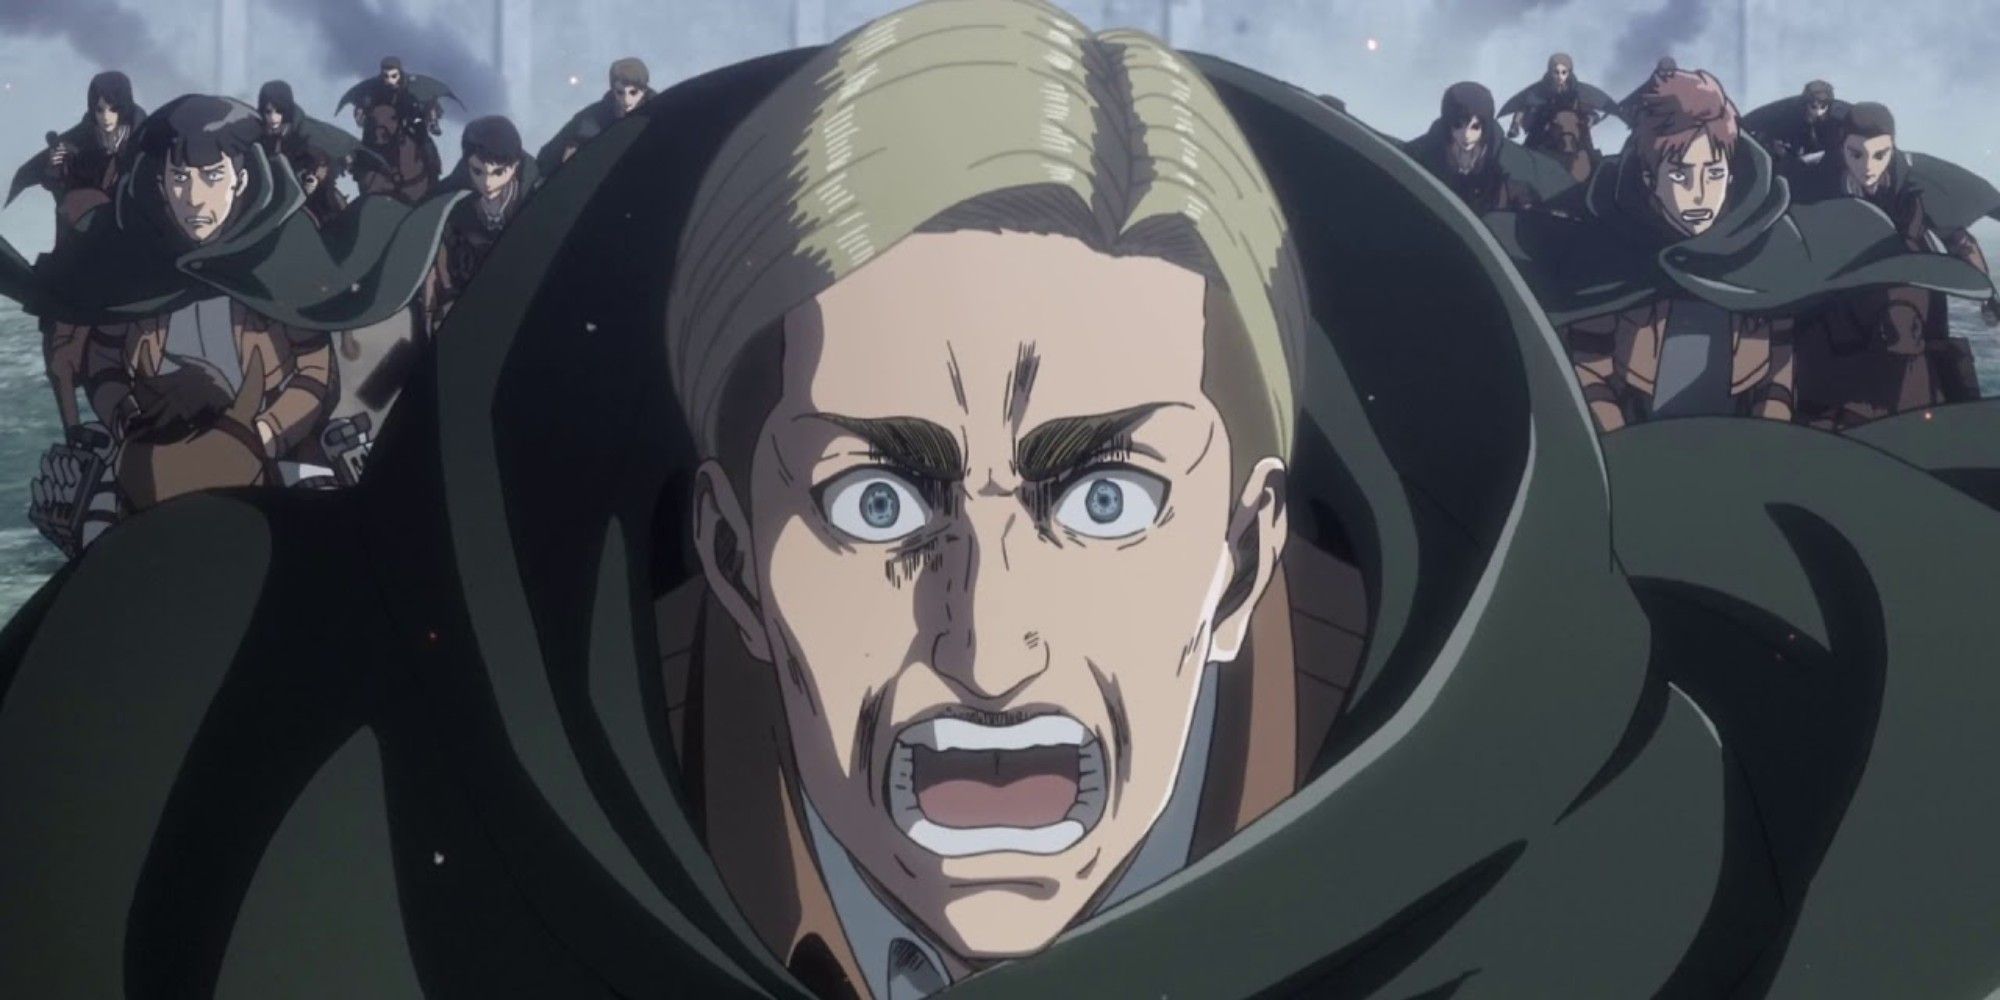 erwin charge in attack on titan